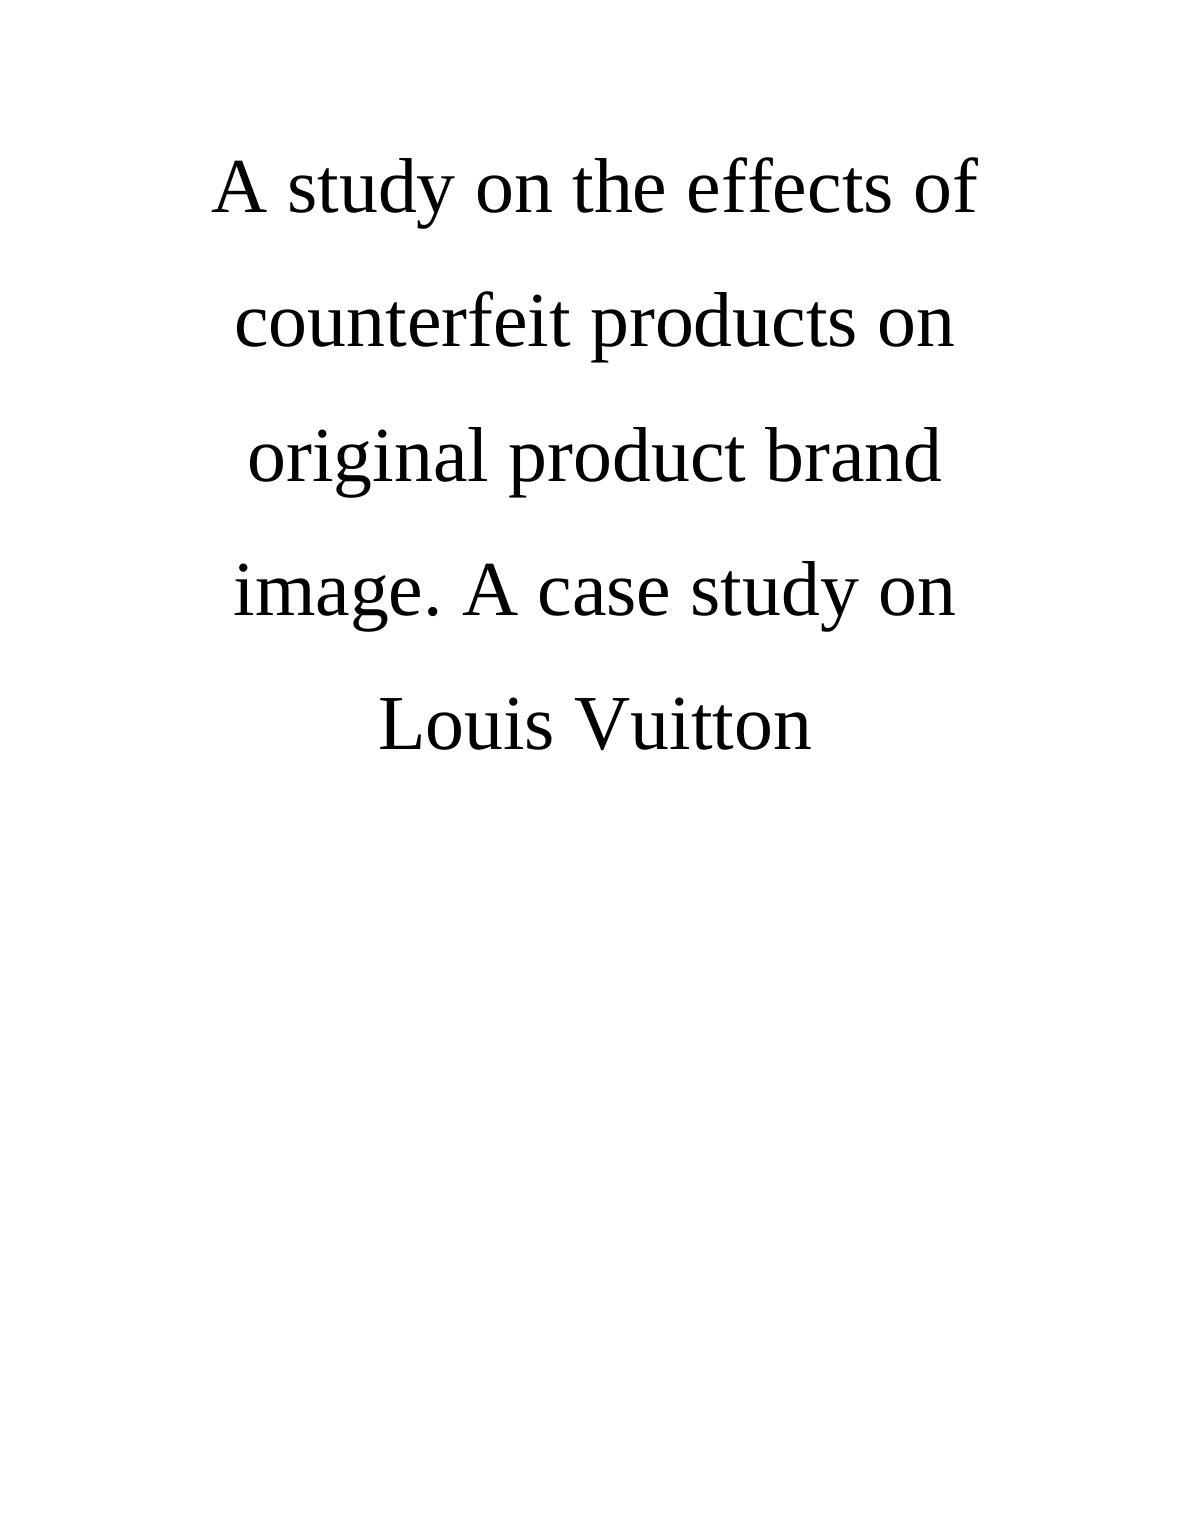 Effects of Counterfeit Products on Original Product Brand Image : Case Study_1